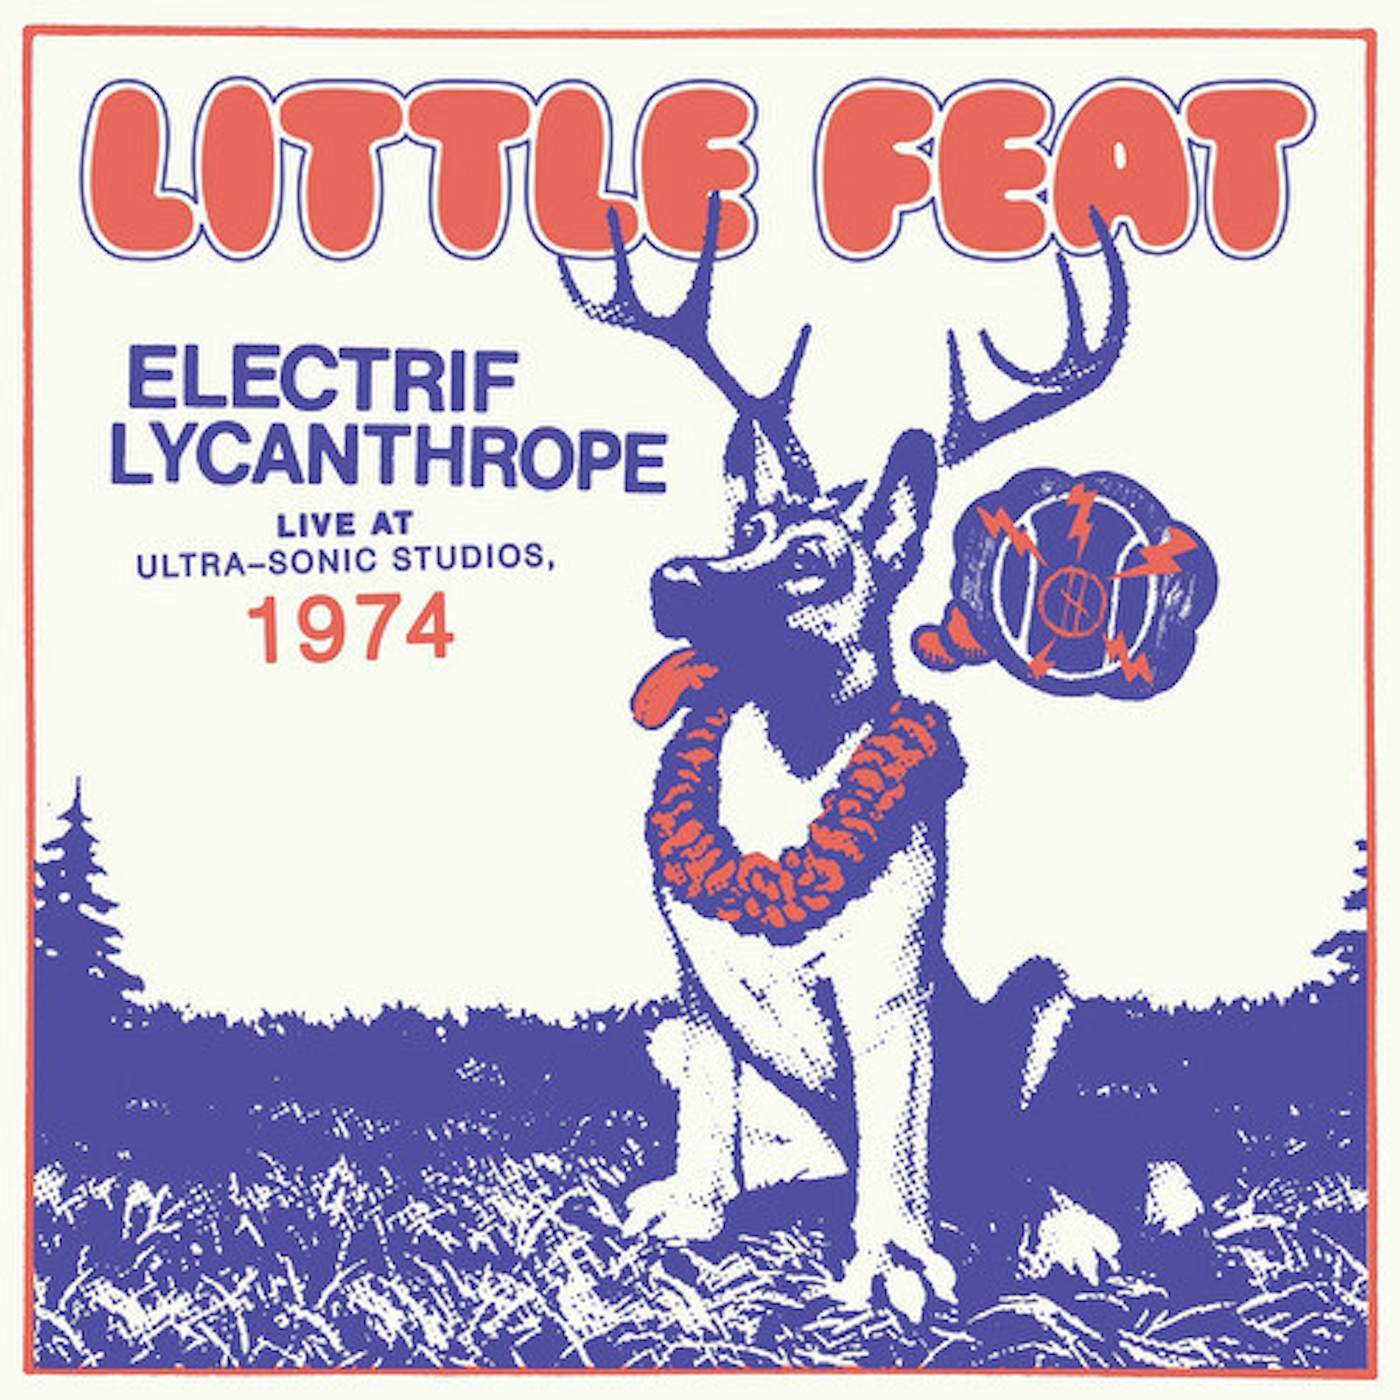 Little Feat ELECTRIF LYCANTHROPE: LIVE AT ULTRA-SONIC STUDIOS Vinyl Record